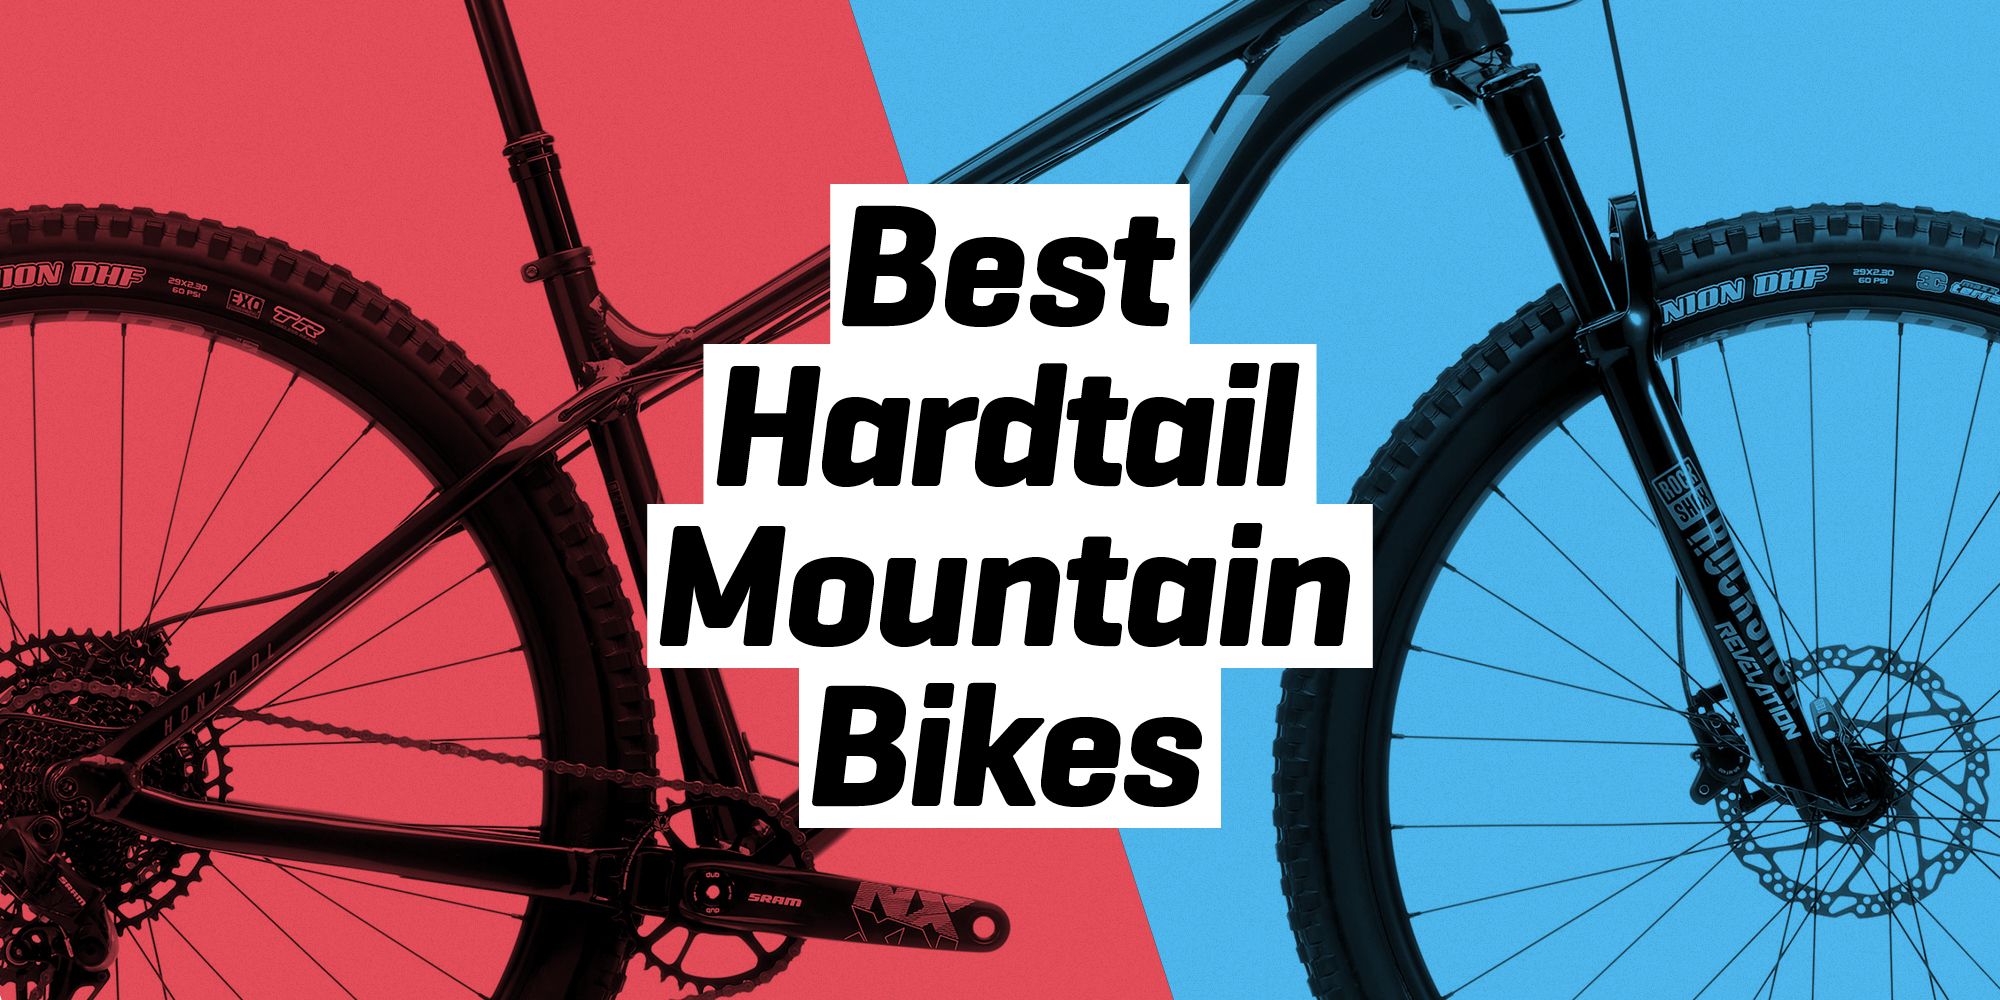 best country for mountain biking